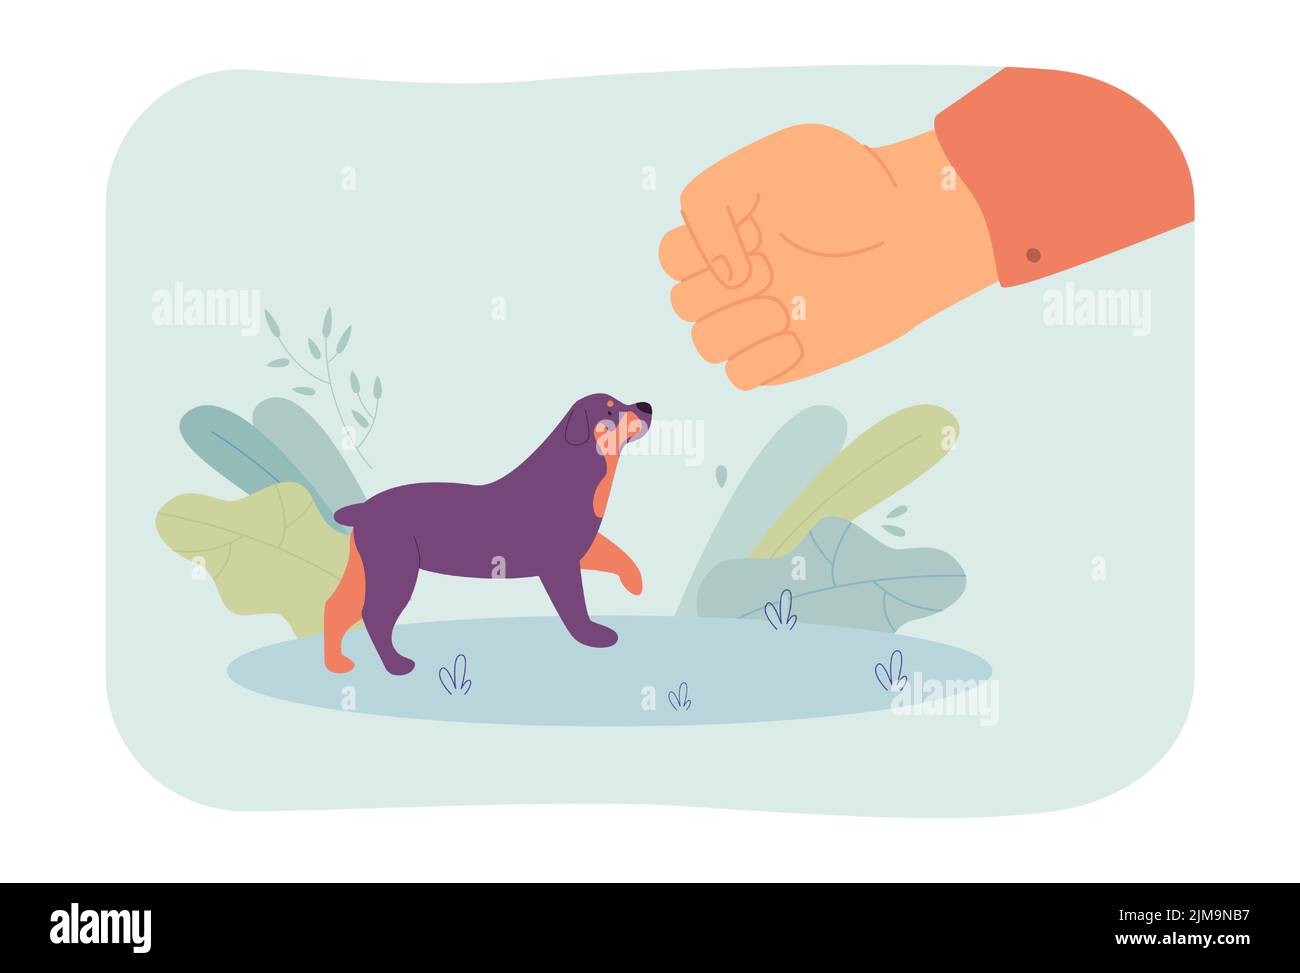 Huge fist threatening tiny dog flat vector illustration. Owner punishing pet for misbehaving or failing to obey command. Discipline, control concept f Stock Vector